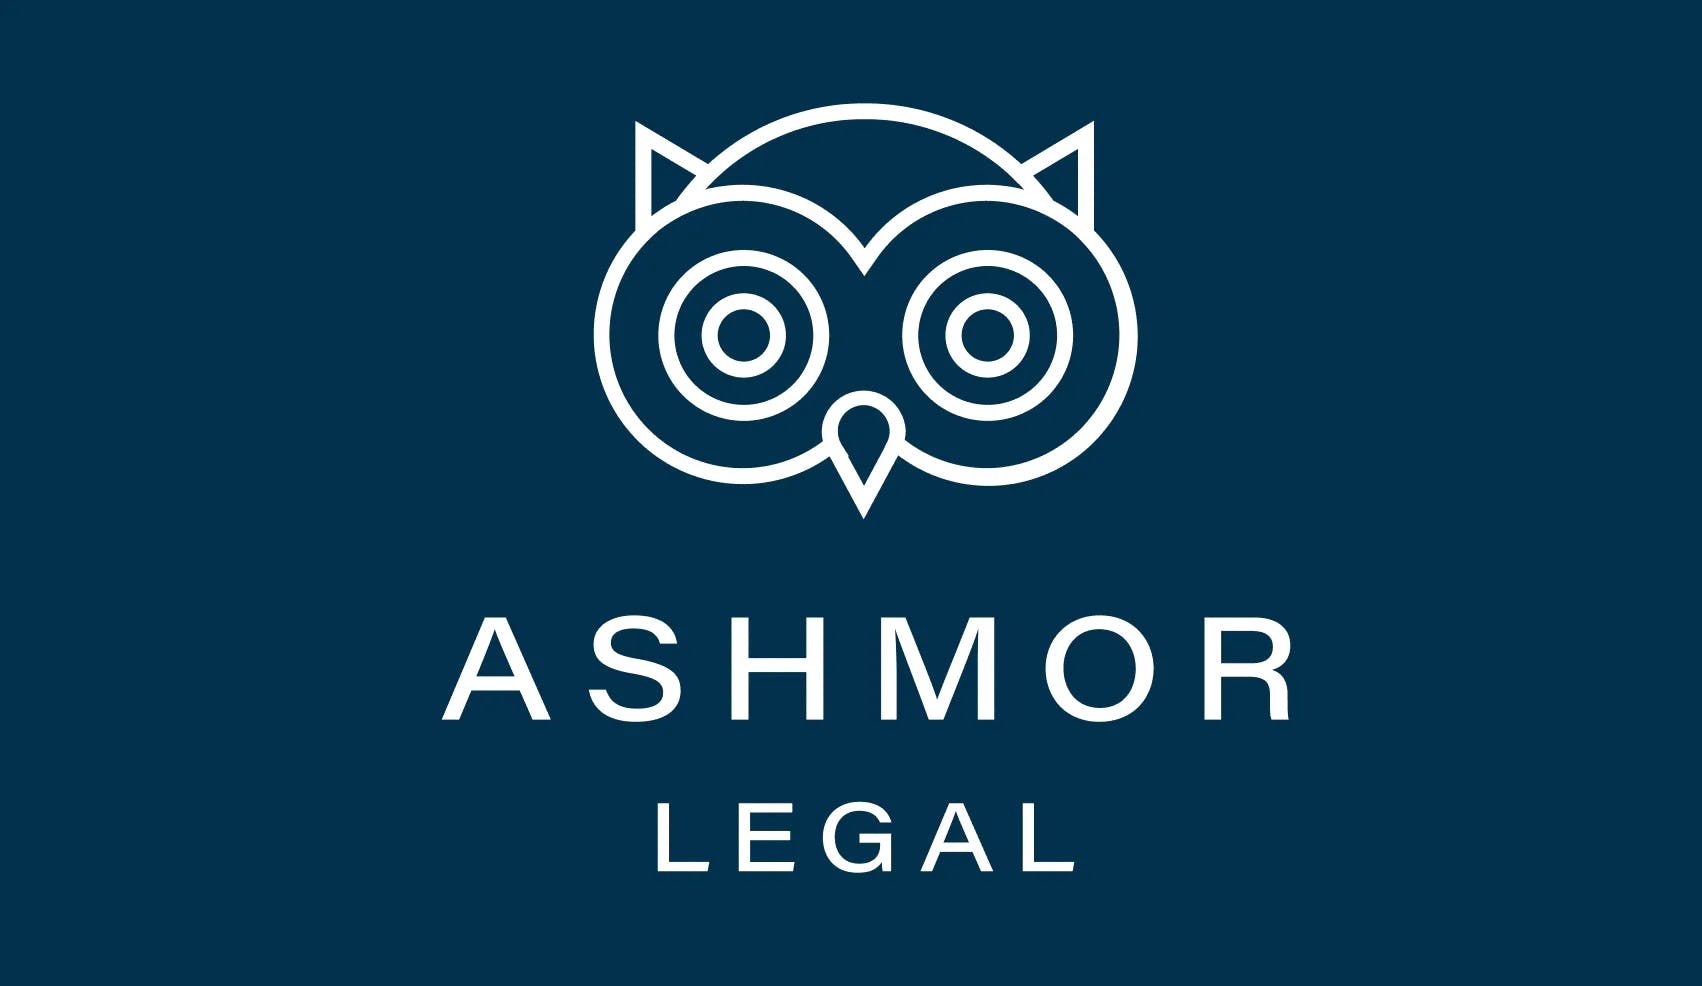 Ashmor Legal is backed by twenty years of legal experience, thousands of successful conveyancing transactions and 150+ five-star client reviews.